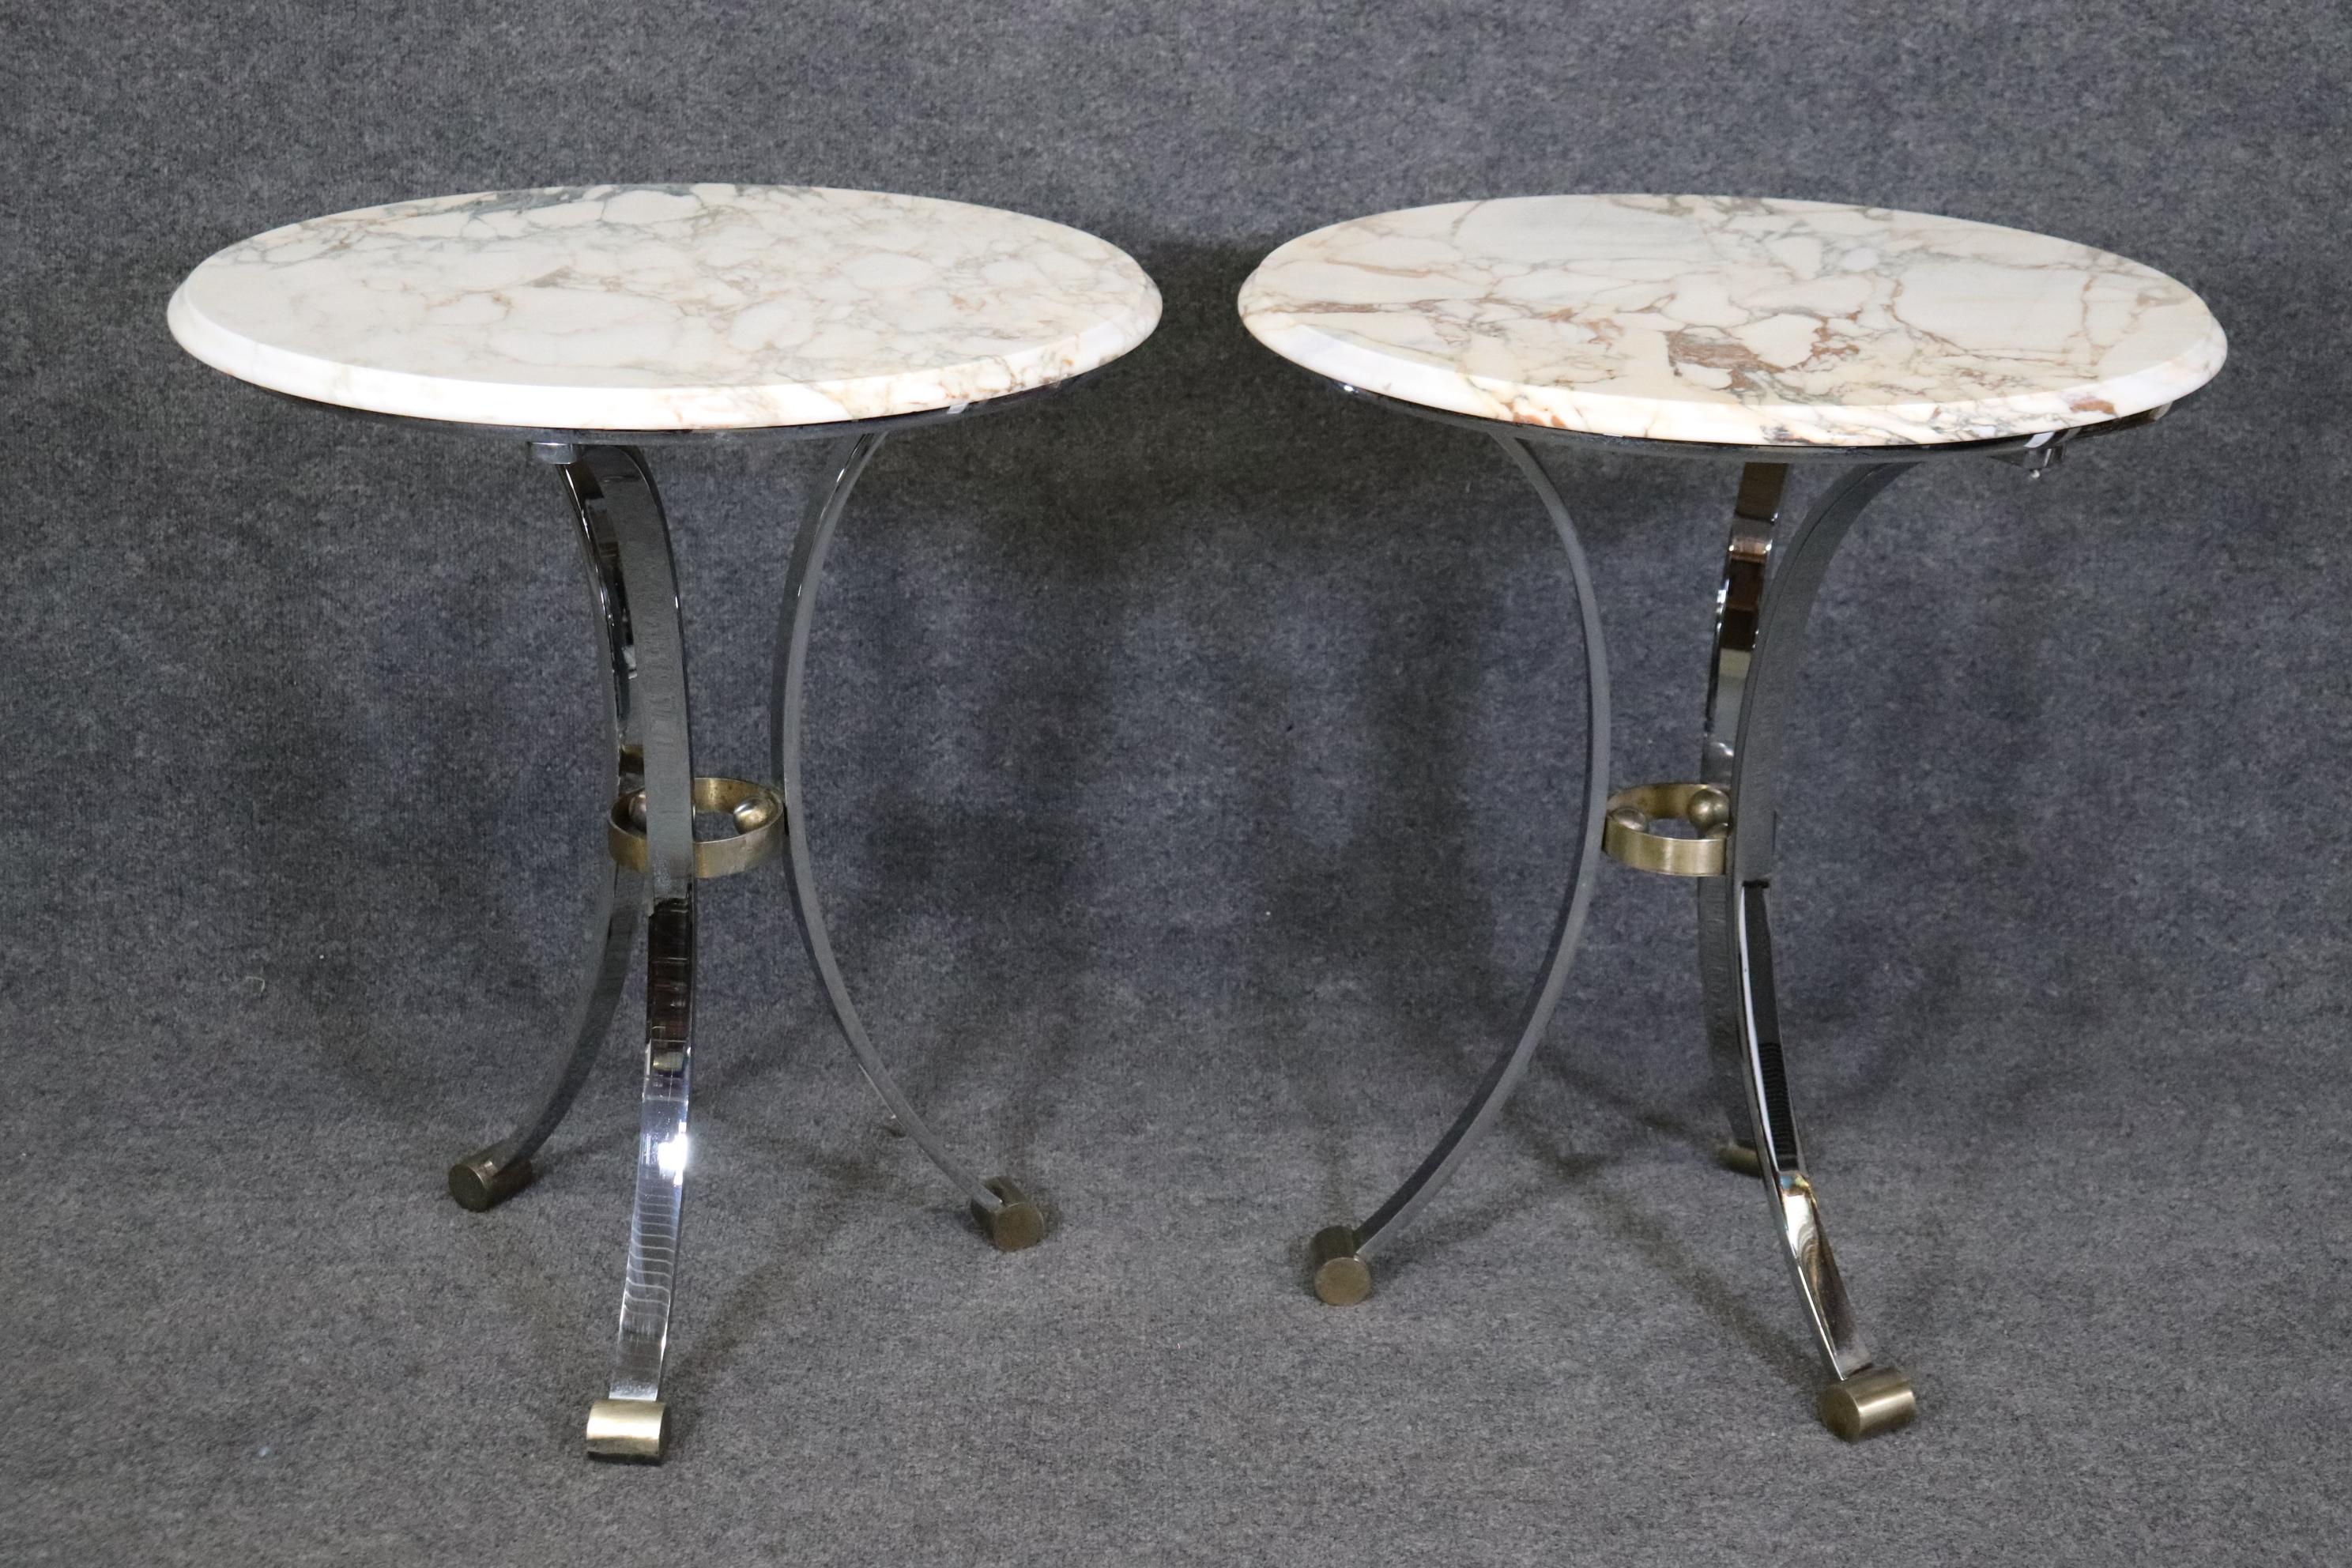 Hollywood Regency Pair of Maison Jansen Attributed Marble Top Gueridon Tables, End Tables For Sale